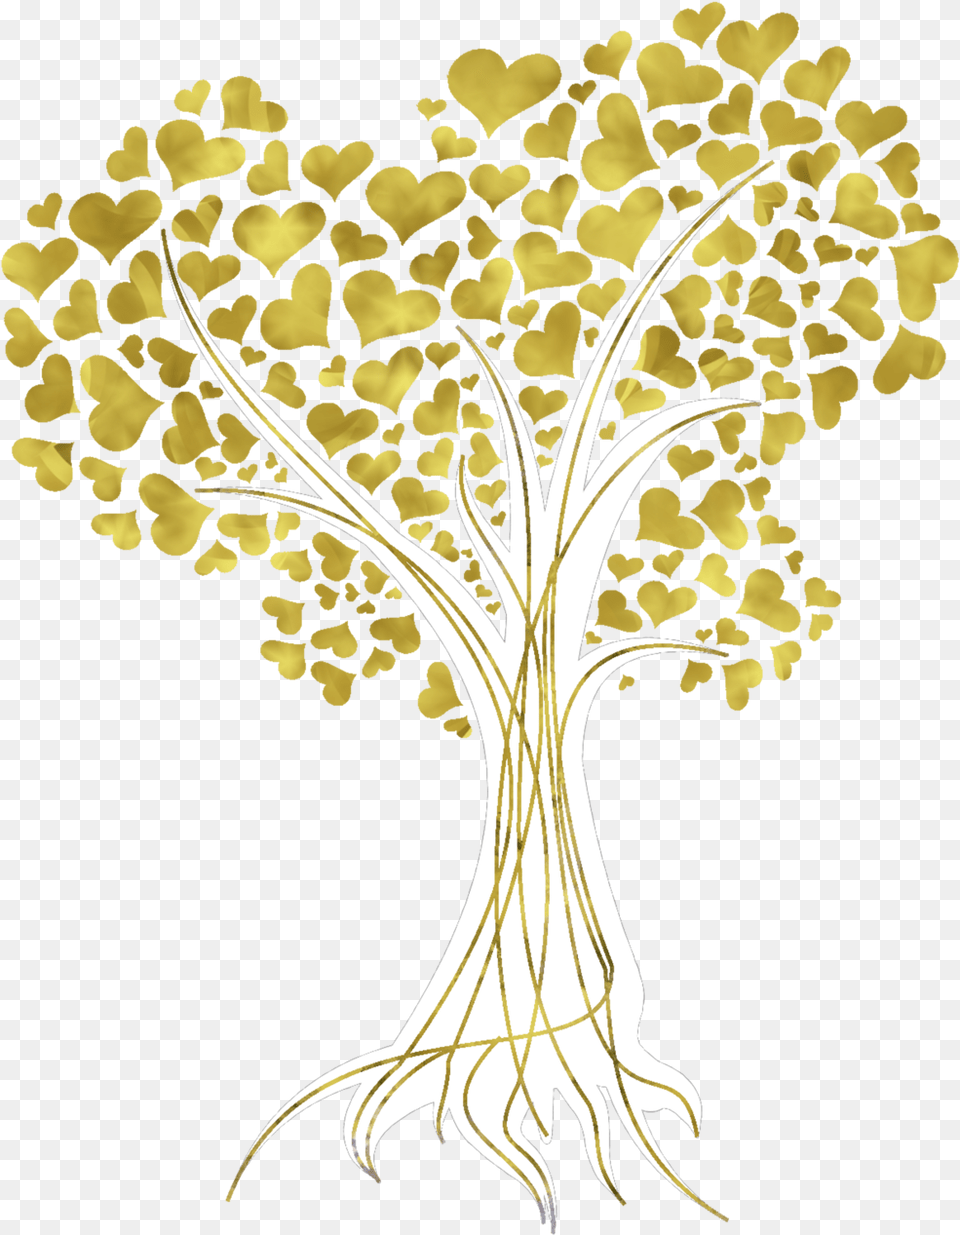 Heart Tree In Gold By Yapity Vector Black Tree With Heart, Art, Floral Design, Graphics, Pattern Free Transparent Png